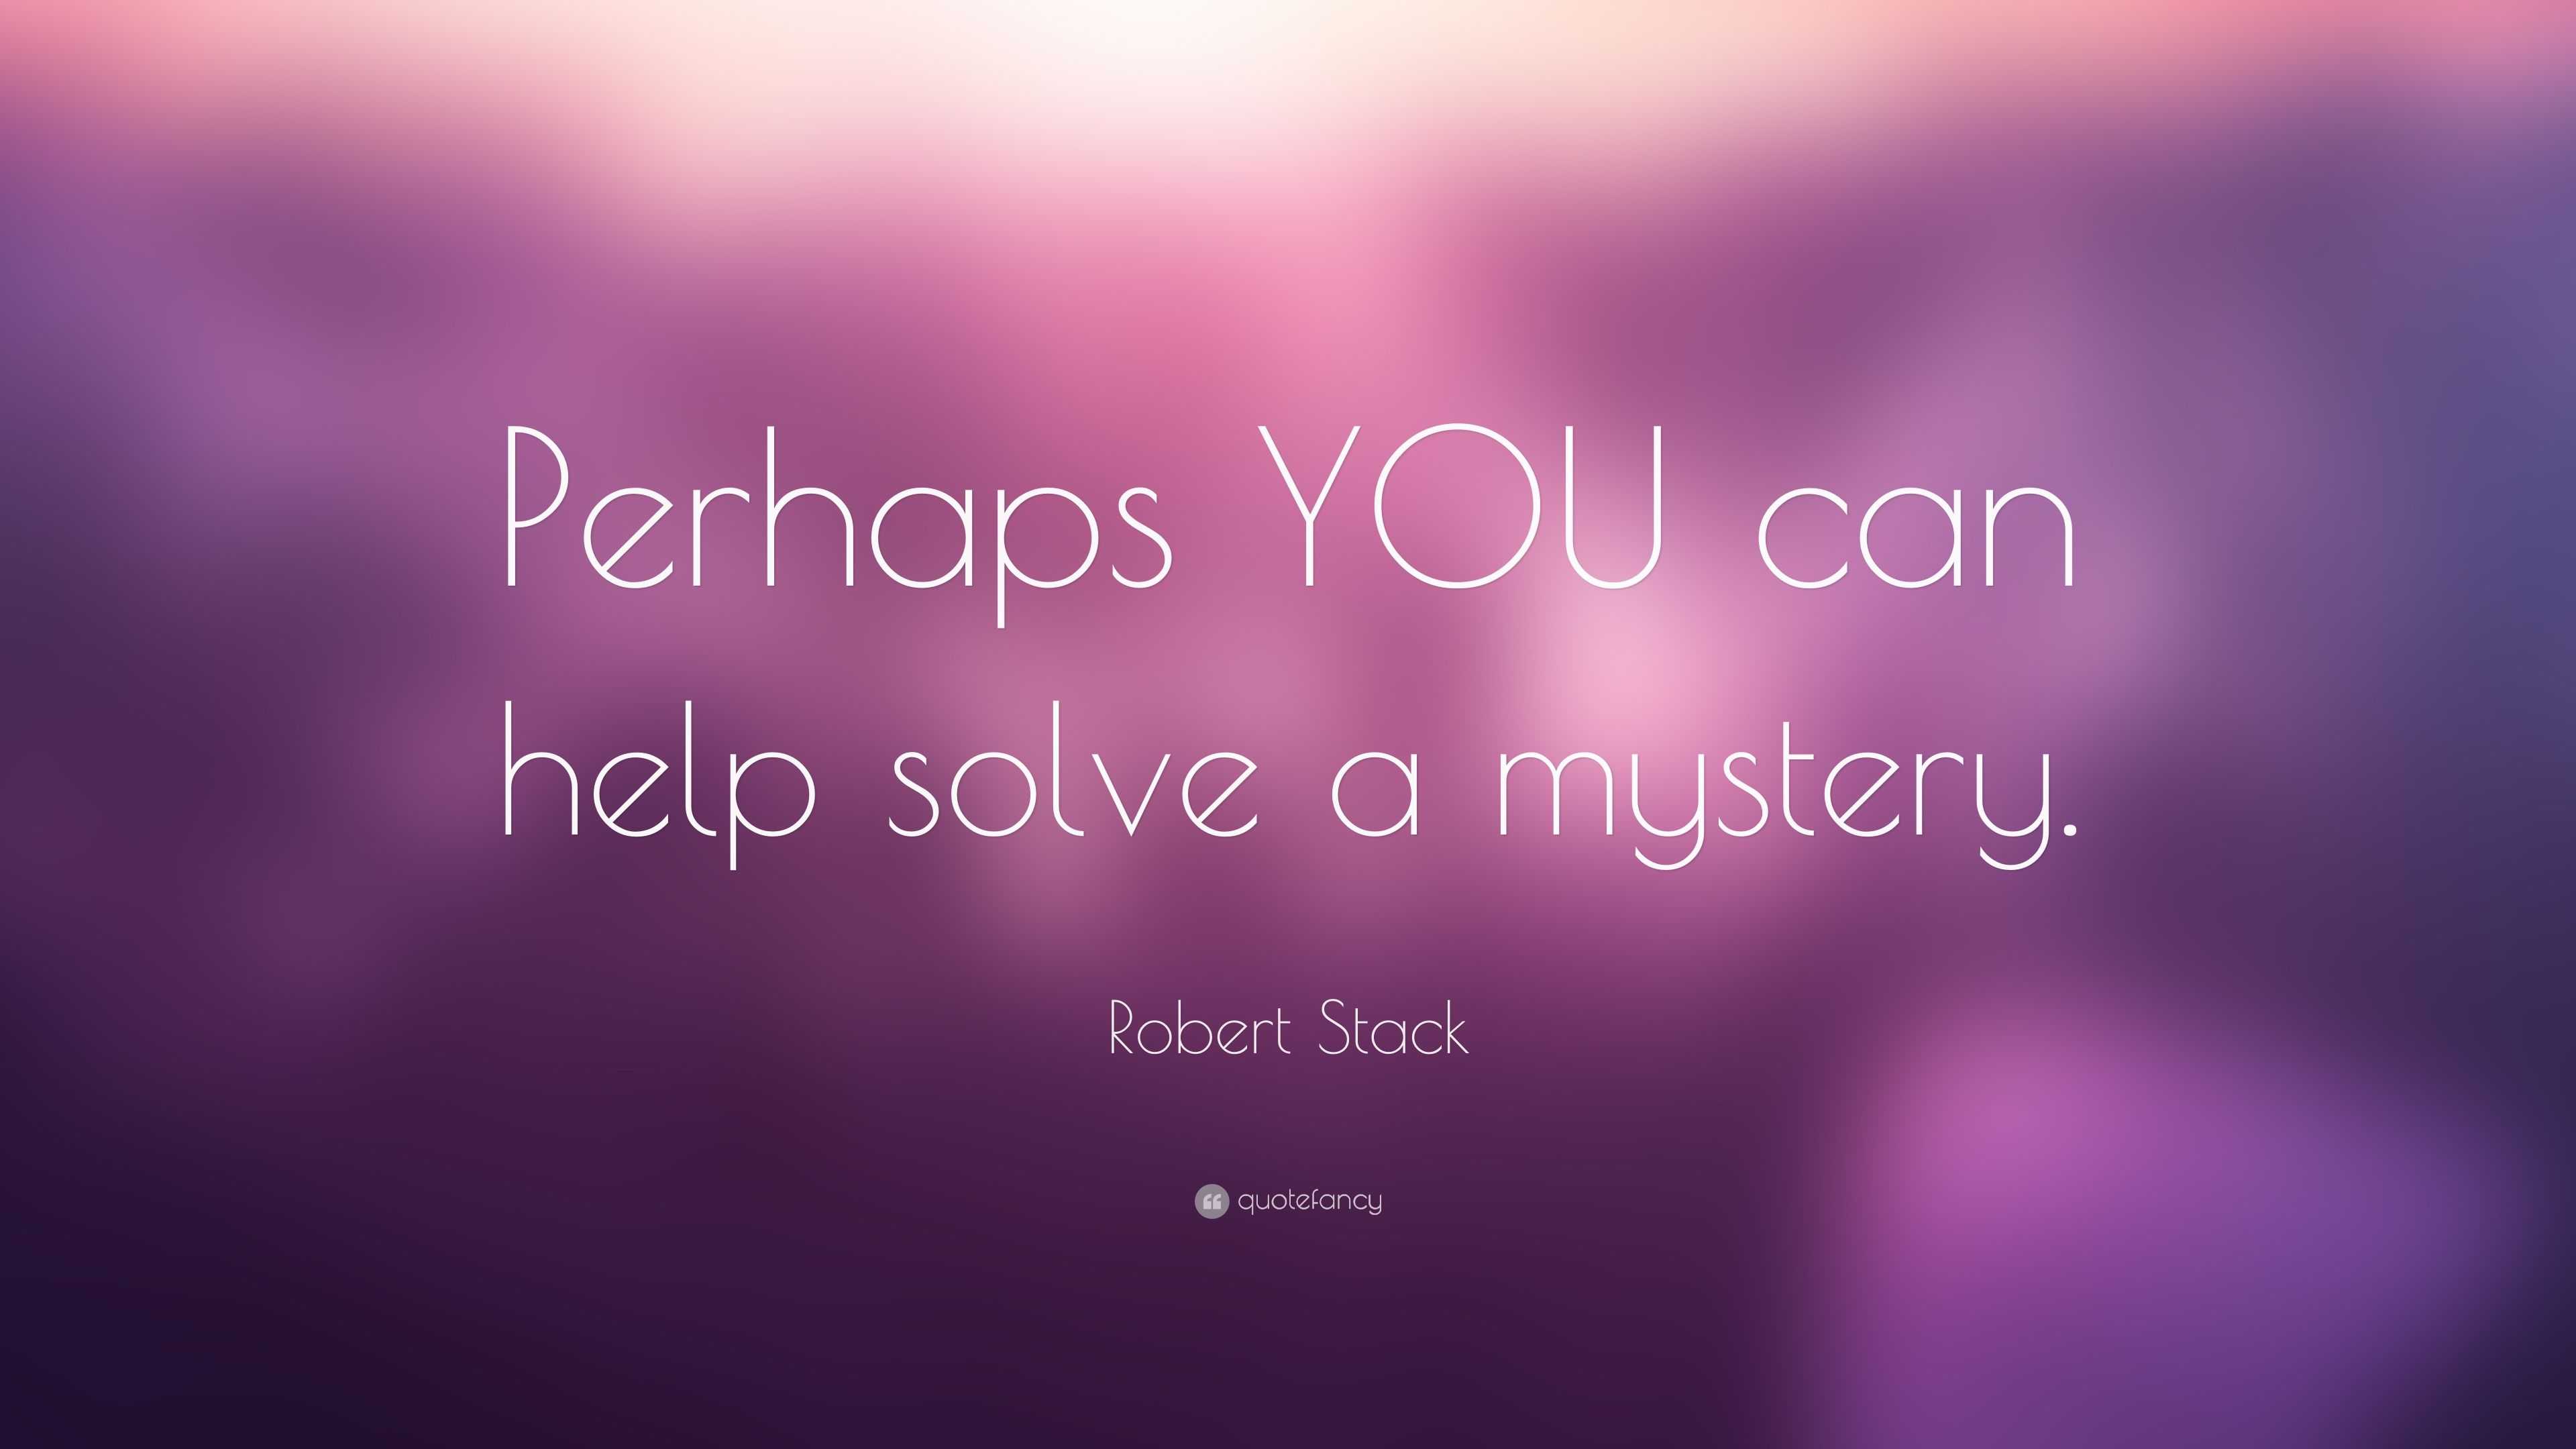 Robert Stack Quote: "Perhaps YOU can help solve a mystery."